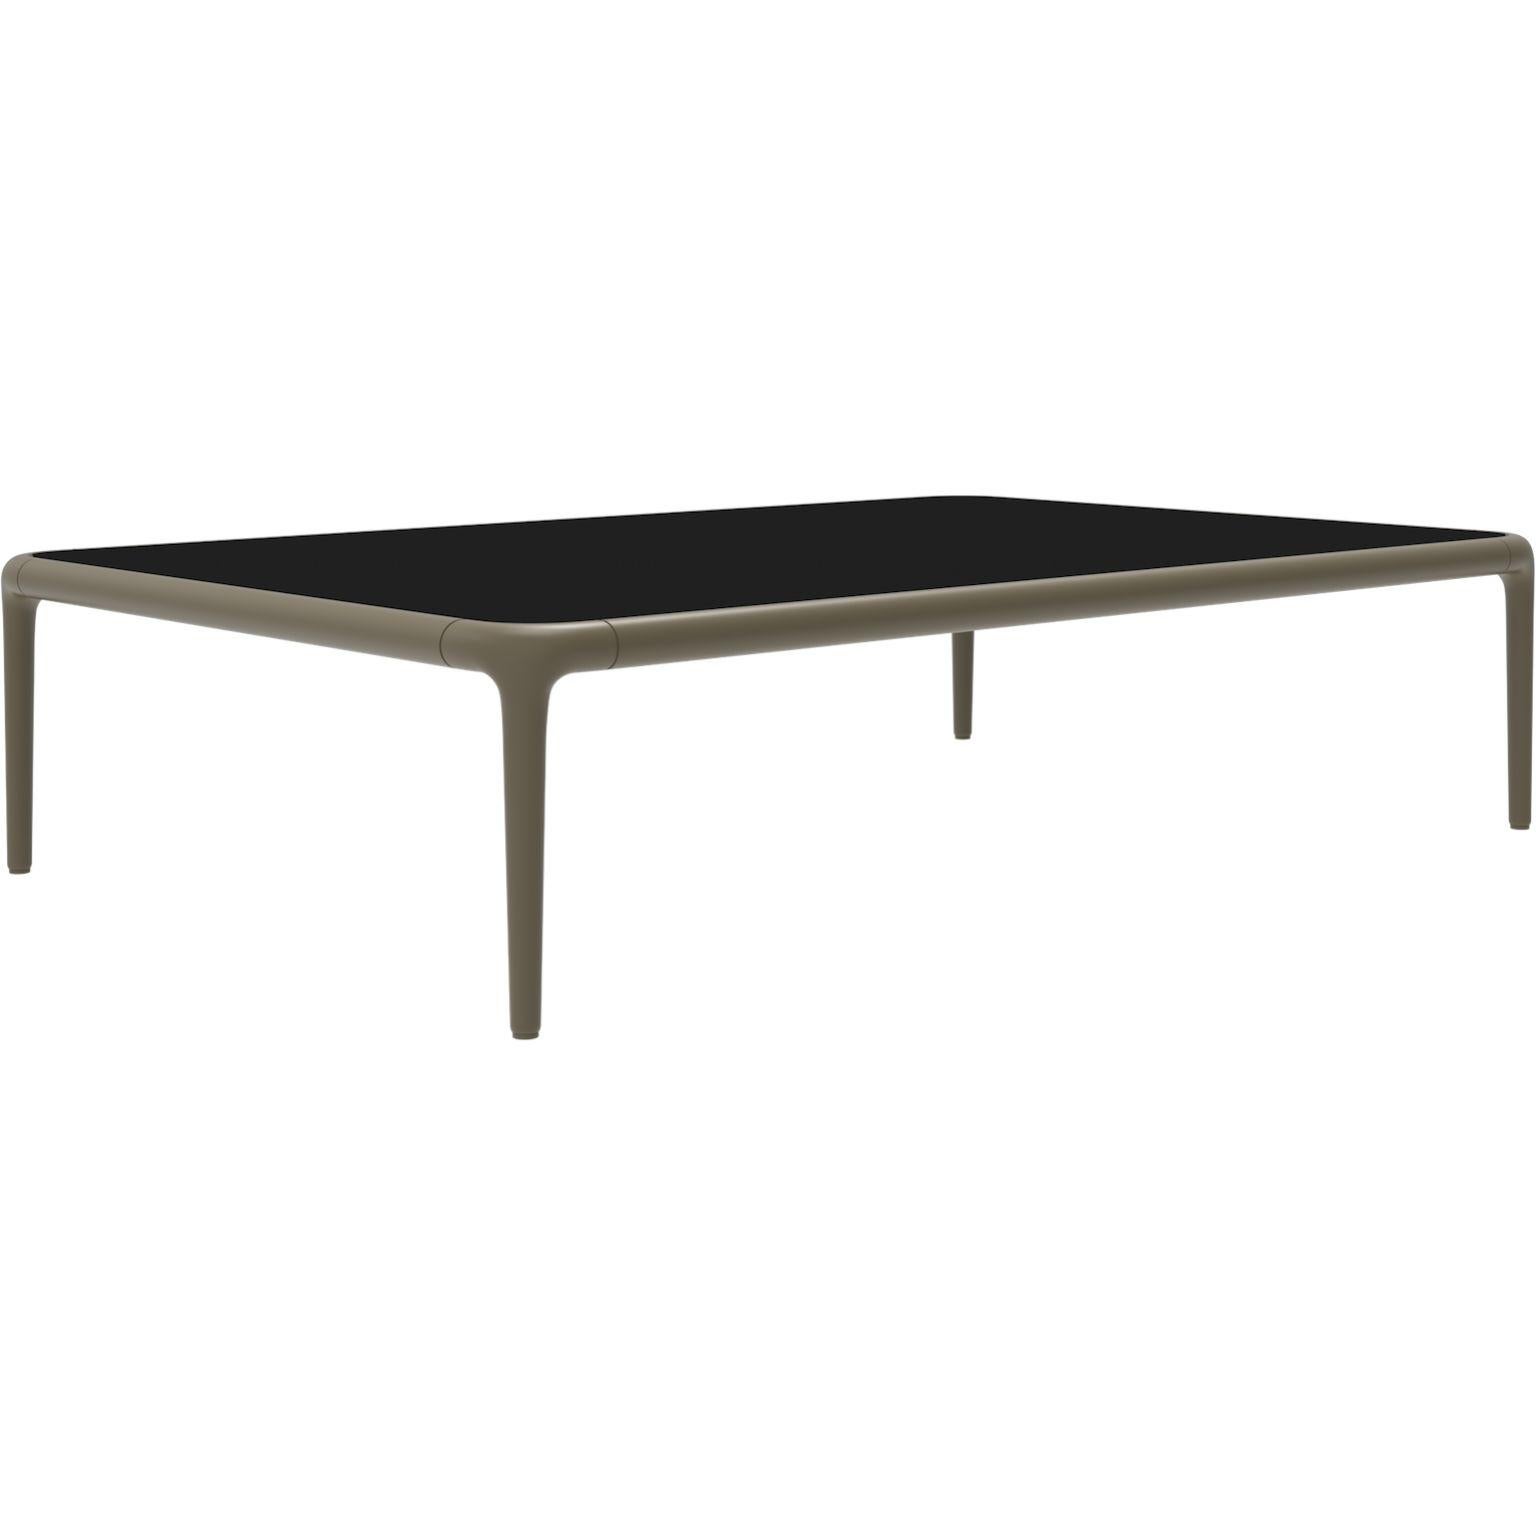 Xaloc Bronze coffee table 120 with glass top by MOWEE
Dimensions: D120 x W80 x H28 cm
Materials: Aluminum, tinted tempered glass top.
Also available in different aluminum colors and finishes (HPL Black Edge or Neolith). 

Xaloc synthesizes the